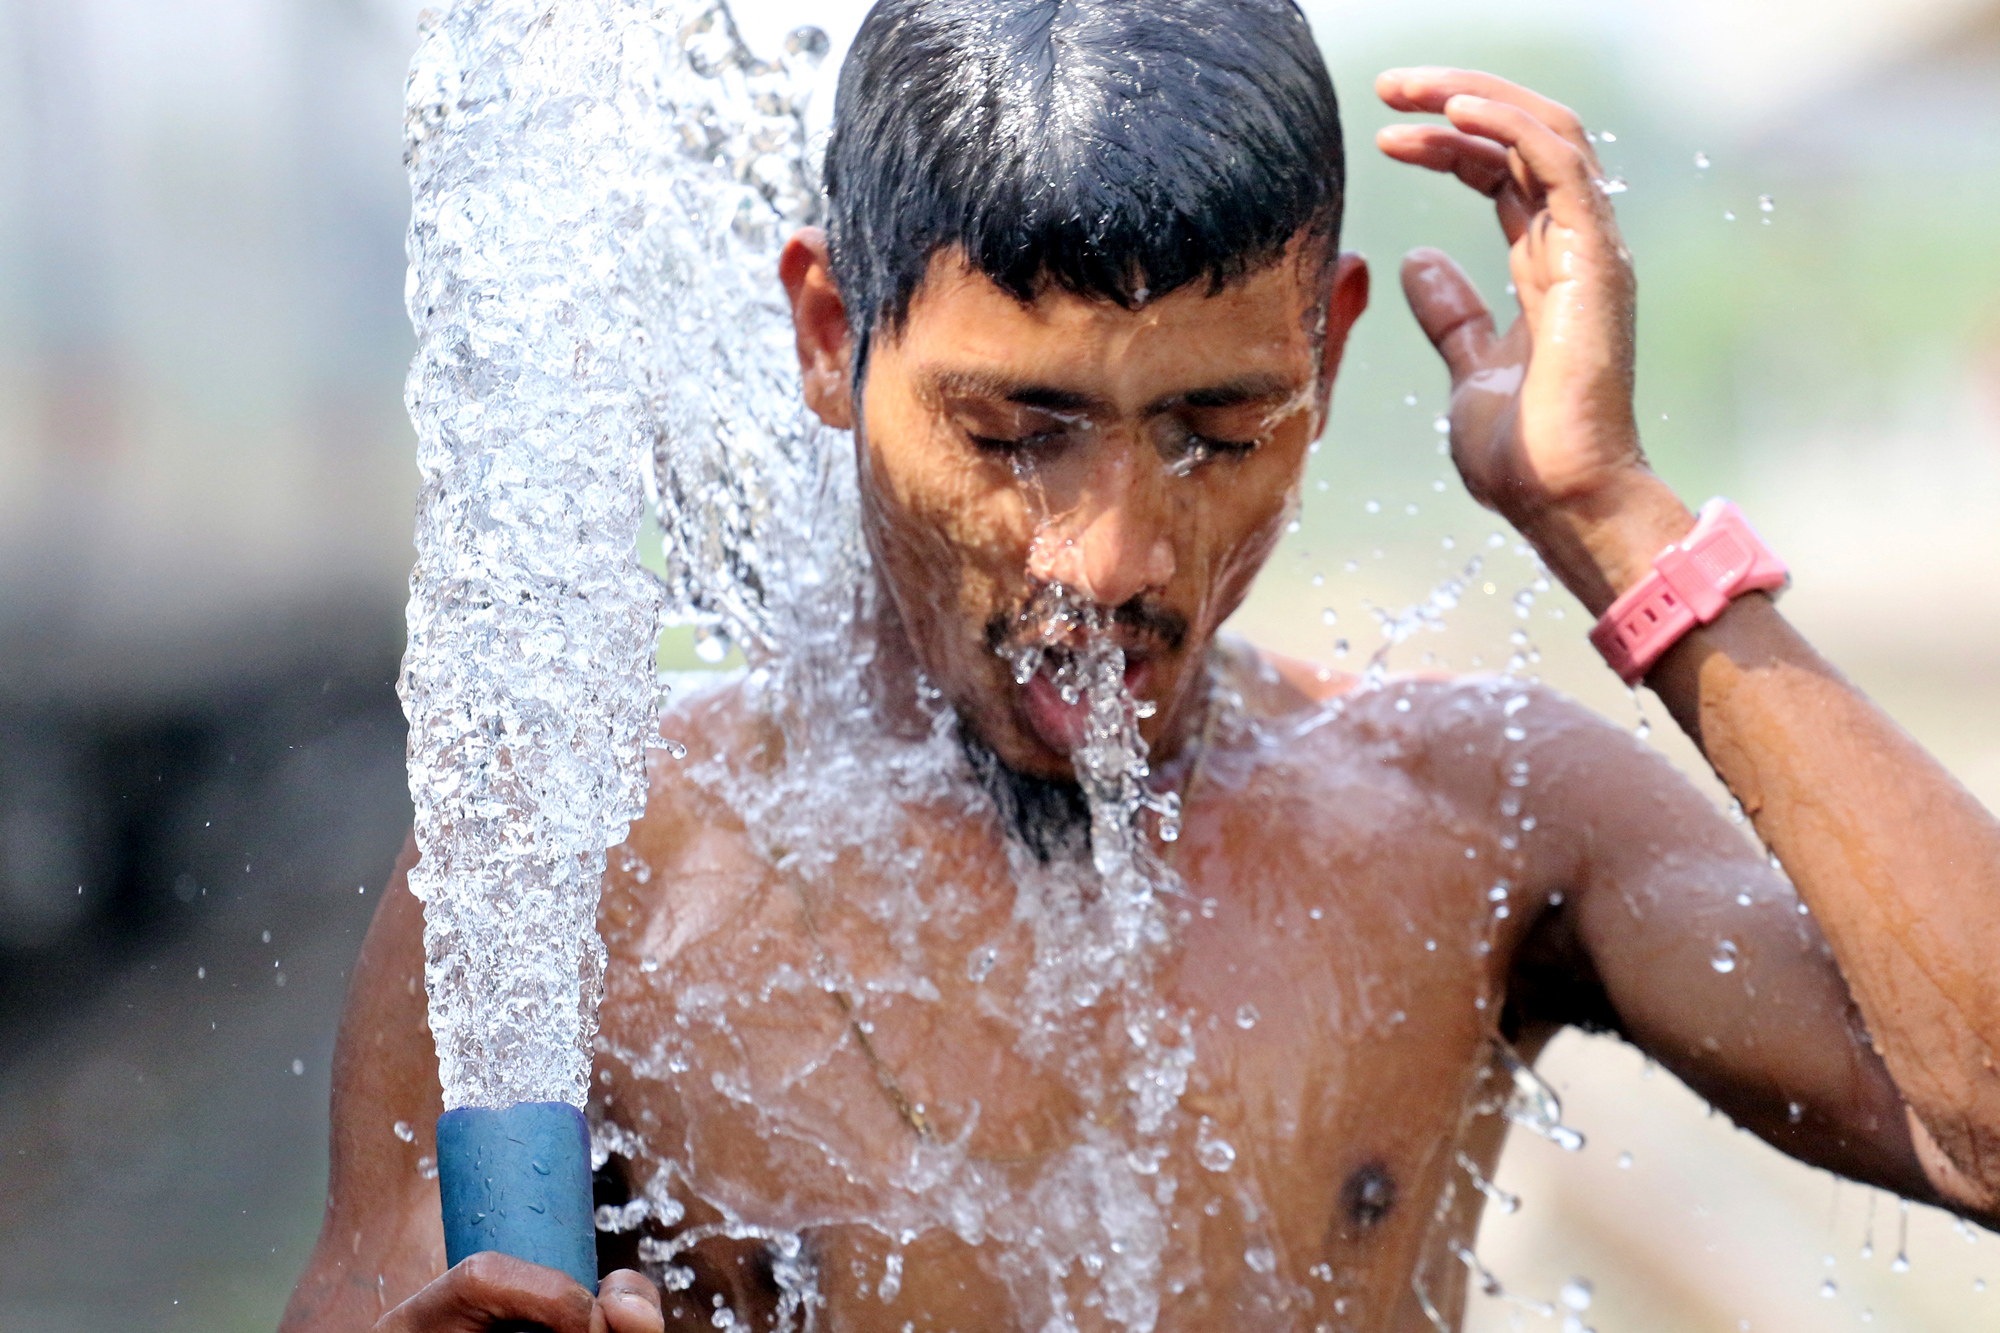 young Indian man spraying water on himself to cool off